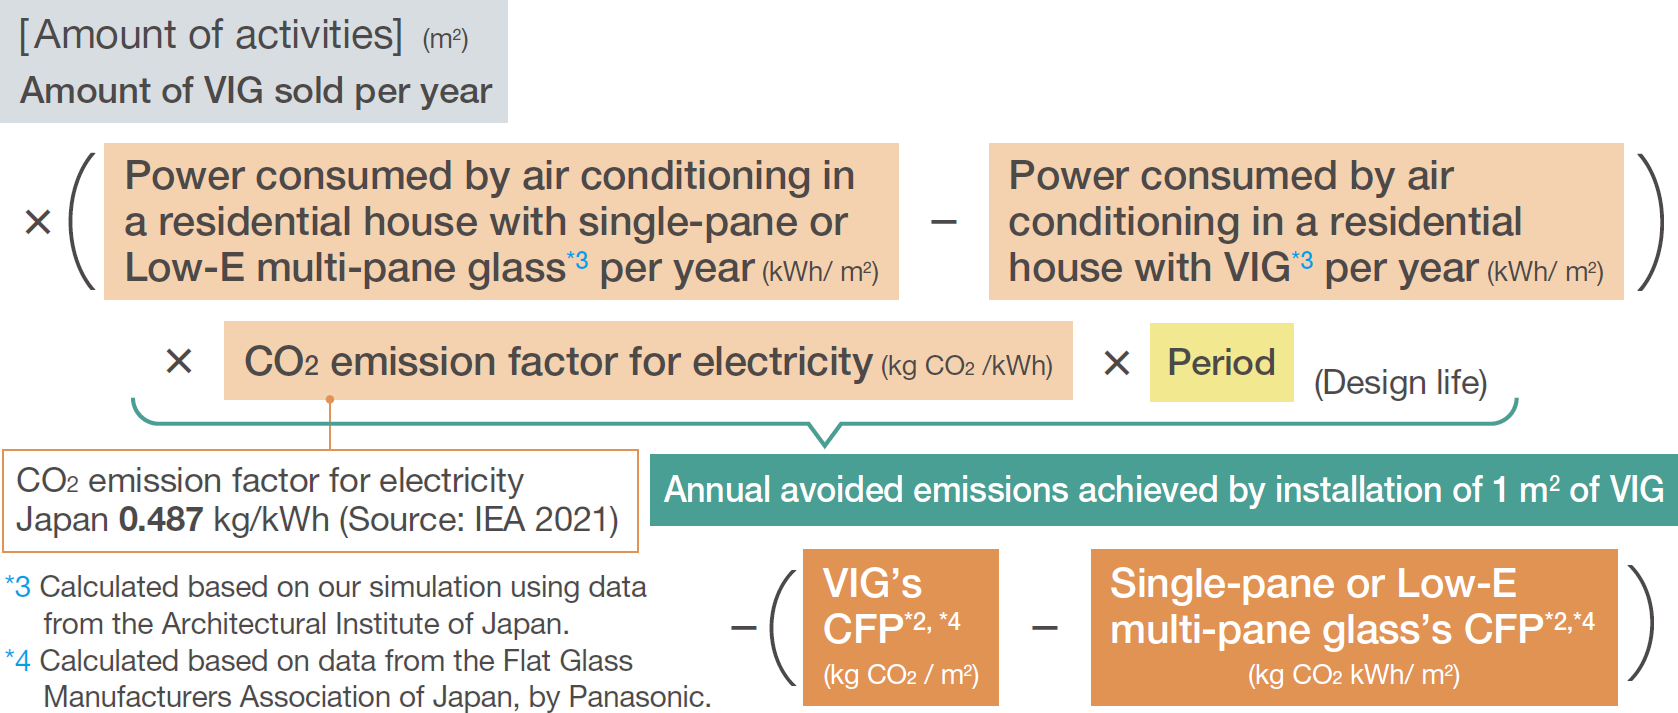 [Amount of activities] (m2) Amount of VIG sold per year * (Power consumed by air conditioning in a residential house with single-pane or Low-E multi-pane glass*3 per year (kWh/ m2) - Power consumed by air conditioning in a residential house with VIG*3 per year (kWh/ m2)) * CO2 emission factor for electricity (kg CO2 /kWh) * Period (Design life) | Annual avoided emissions achieved by installation of 1 m2 of VIG | CO2 emission factor for electricity Japan 0.487 kg/kWh (Source: IEA 2021) | *3 Calculated based on our simulation using data from the Architectural Institute of Japan. *4 Calculated based on data from the Flat Glass Manufacturers Association of Japan, by Panasonic. | - (VIG’s CFP*2, *4 (kg CO2 / m2) - Single-pane or Low-E multi-pane glass’s CFP*2,*4 (kg CO2 kWh/ m2))